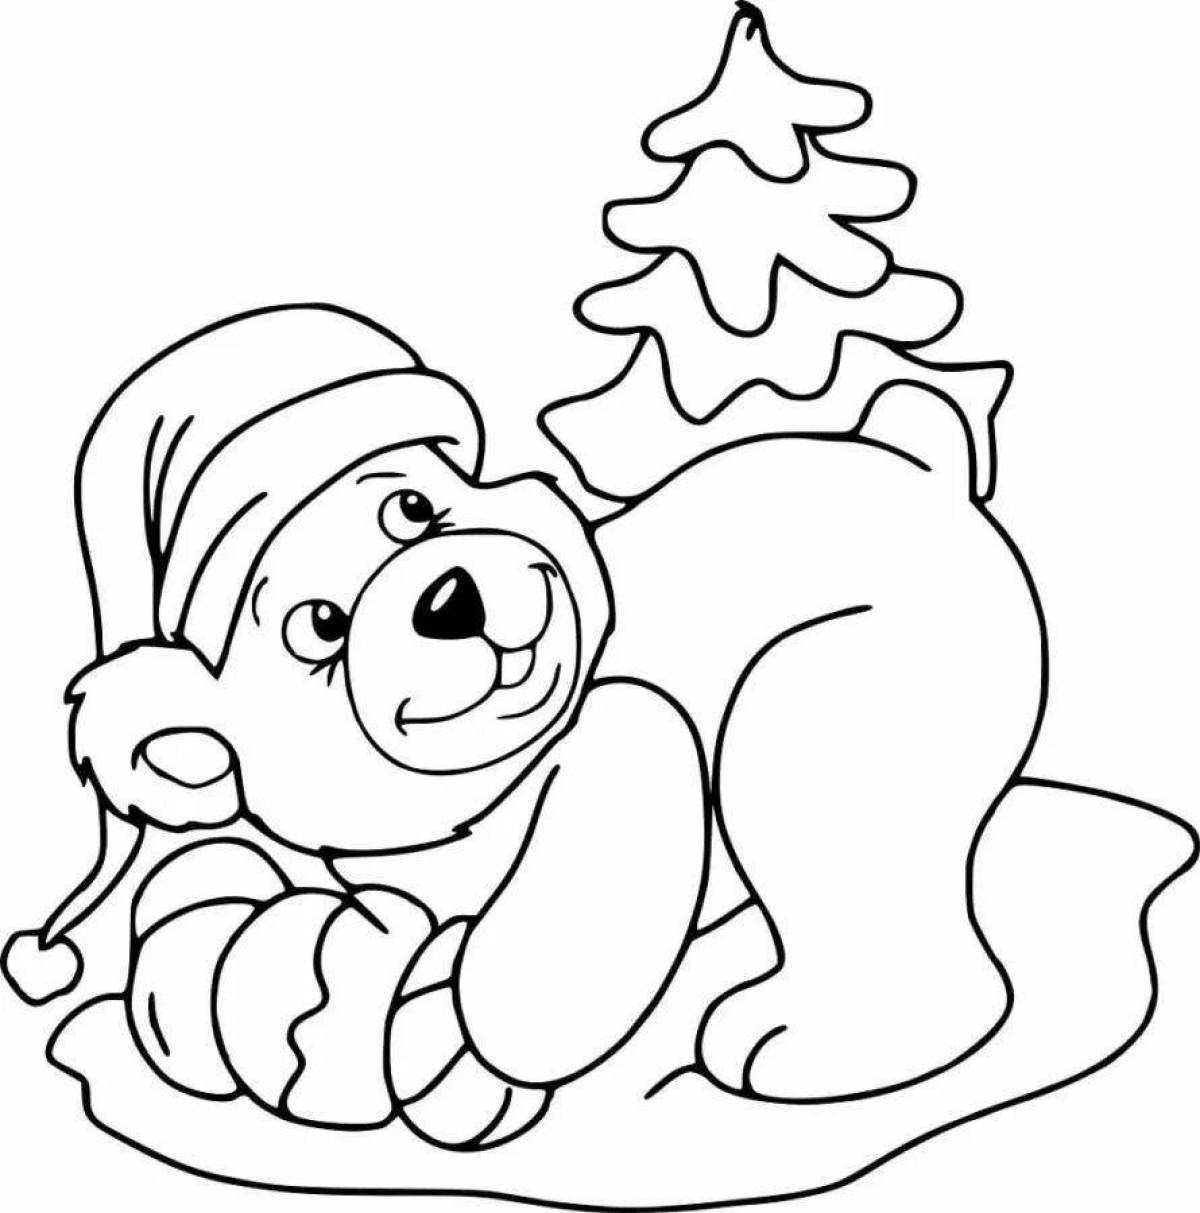 Glitter Christmas bear coloring page